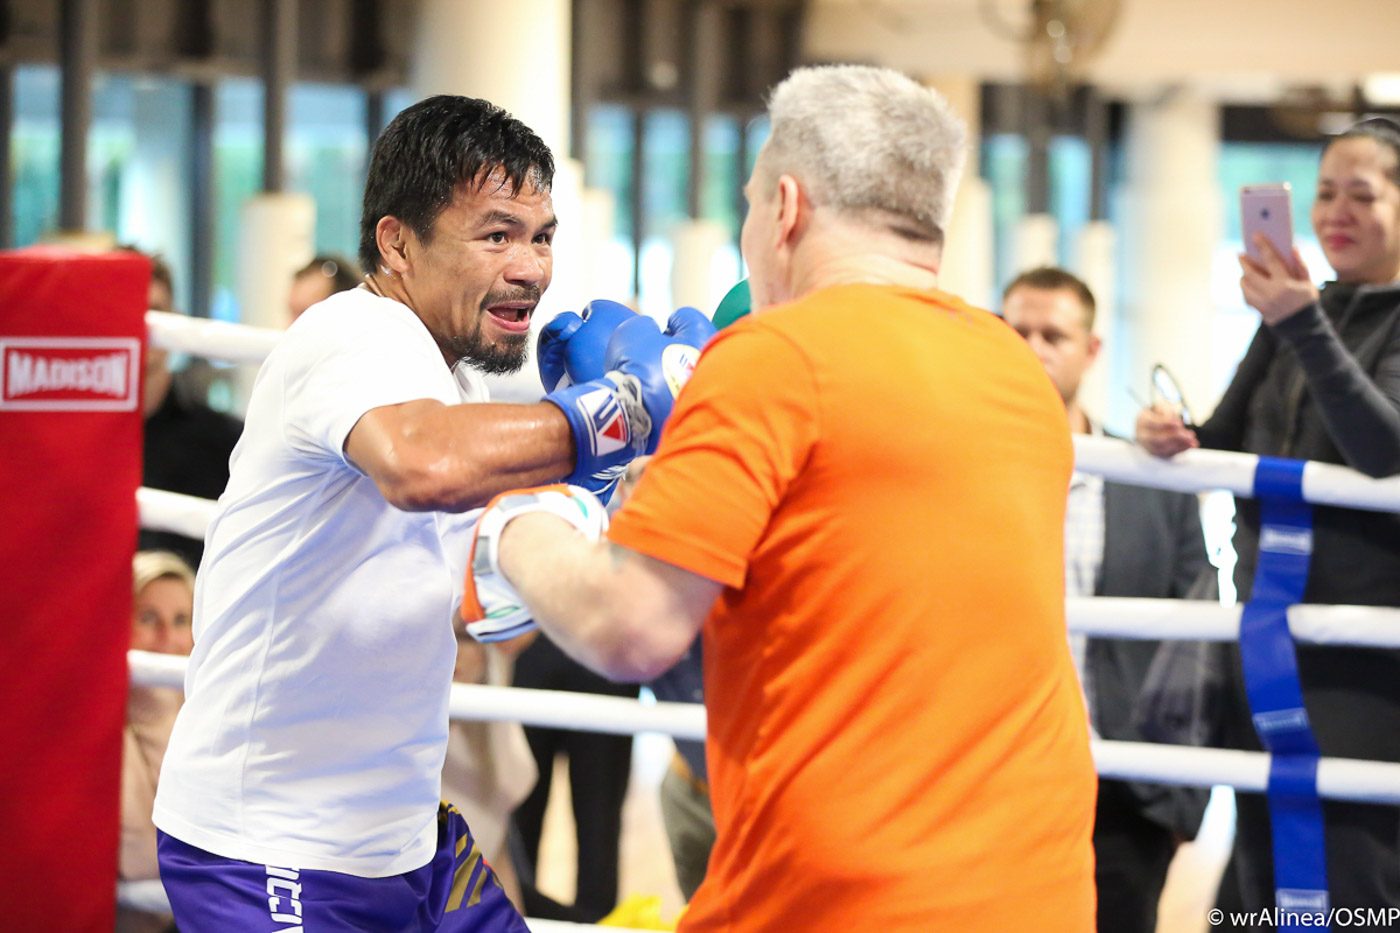 WATCH: Manny Pacquiao shows hand skills for Australian media